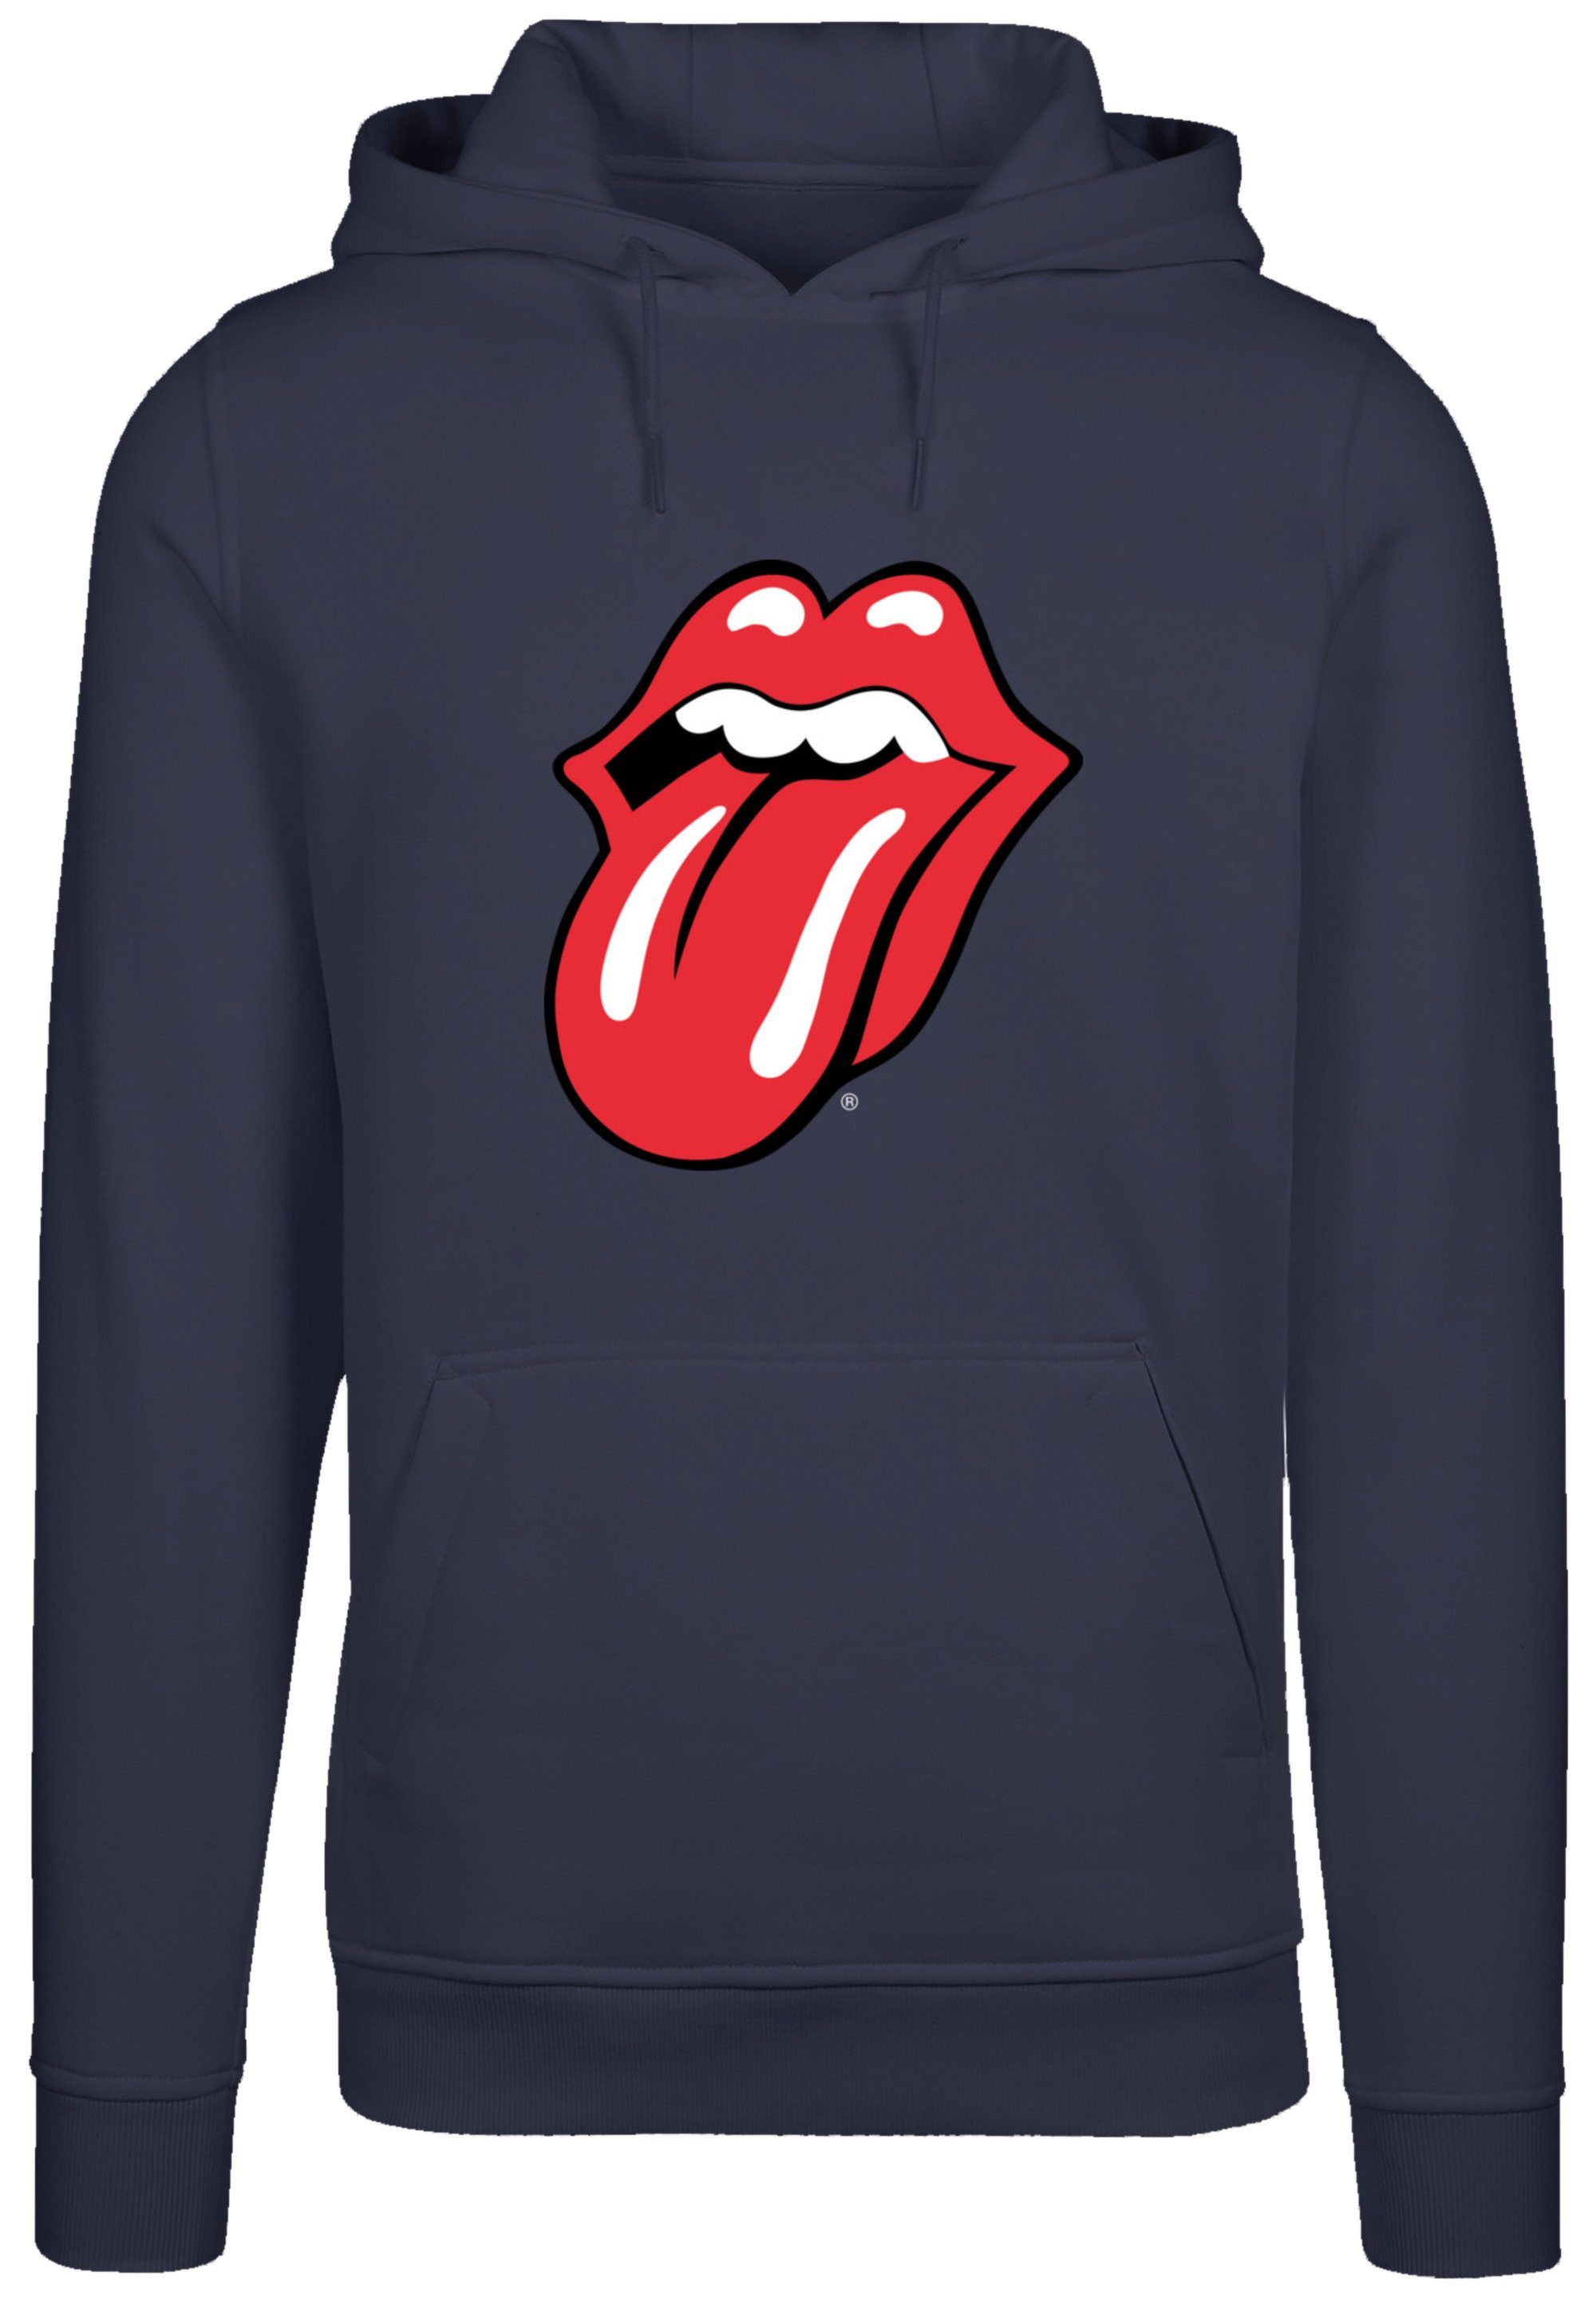 F4NT4STIC Kapuzenpullover Rolling Rock Bequem The navy Hoodie, Warm, Classic Stones Zunge Band Musik